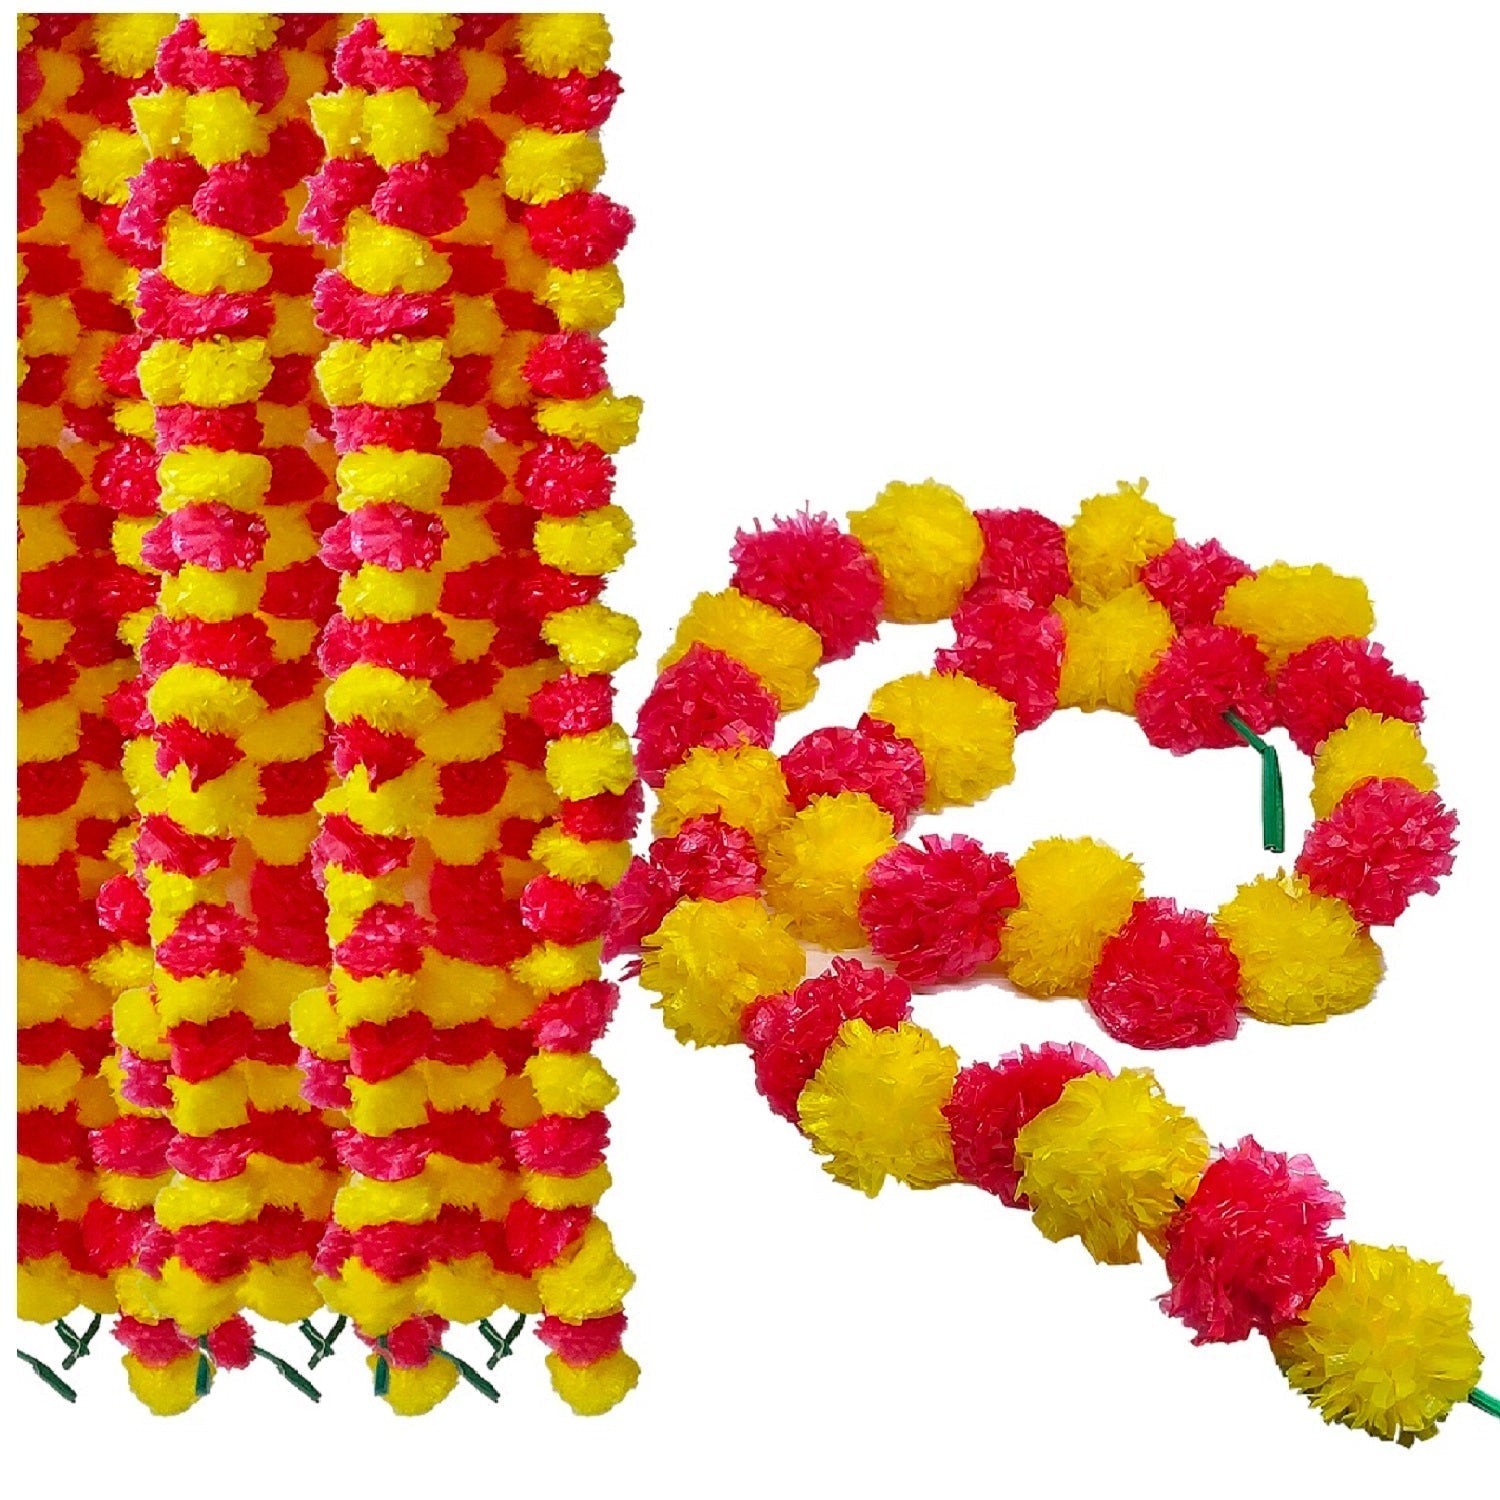 5 Feet Long Marigold Garland For Home Decoration